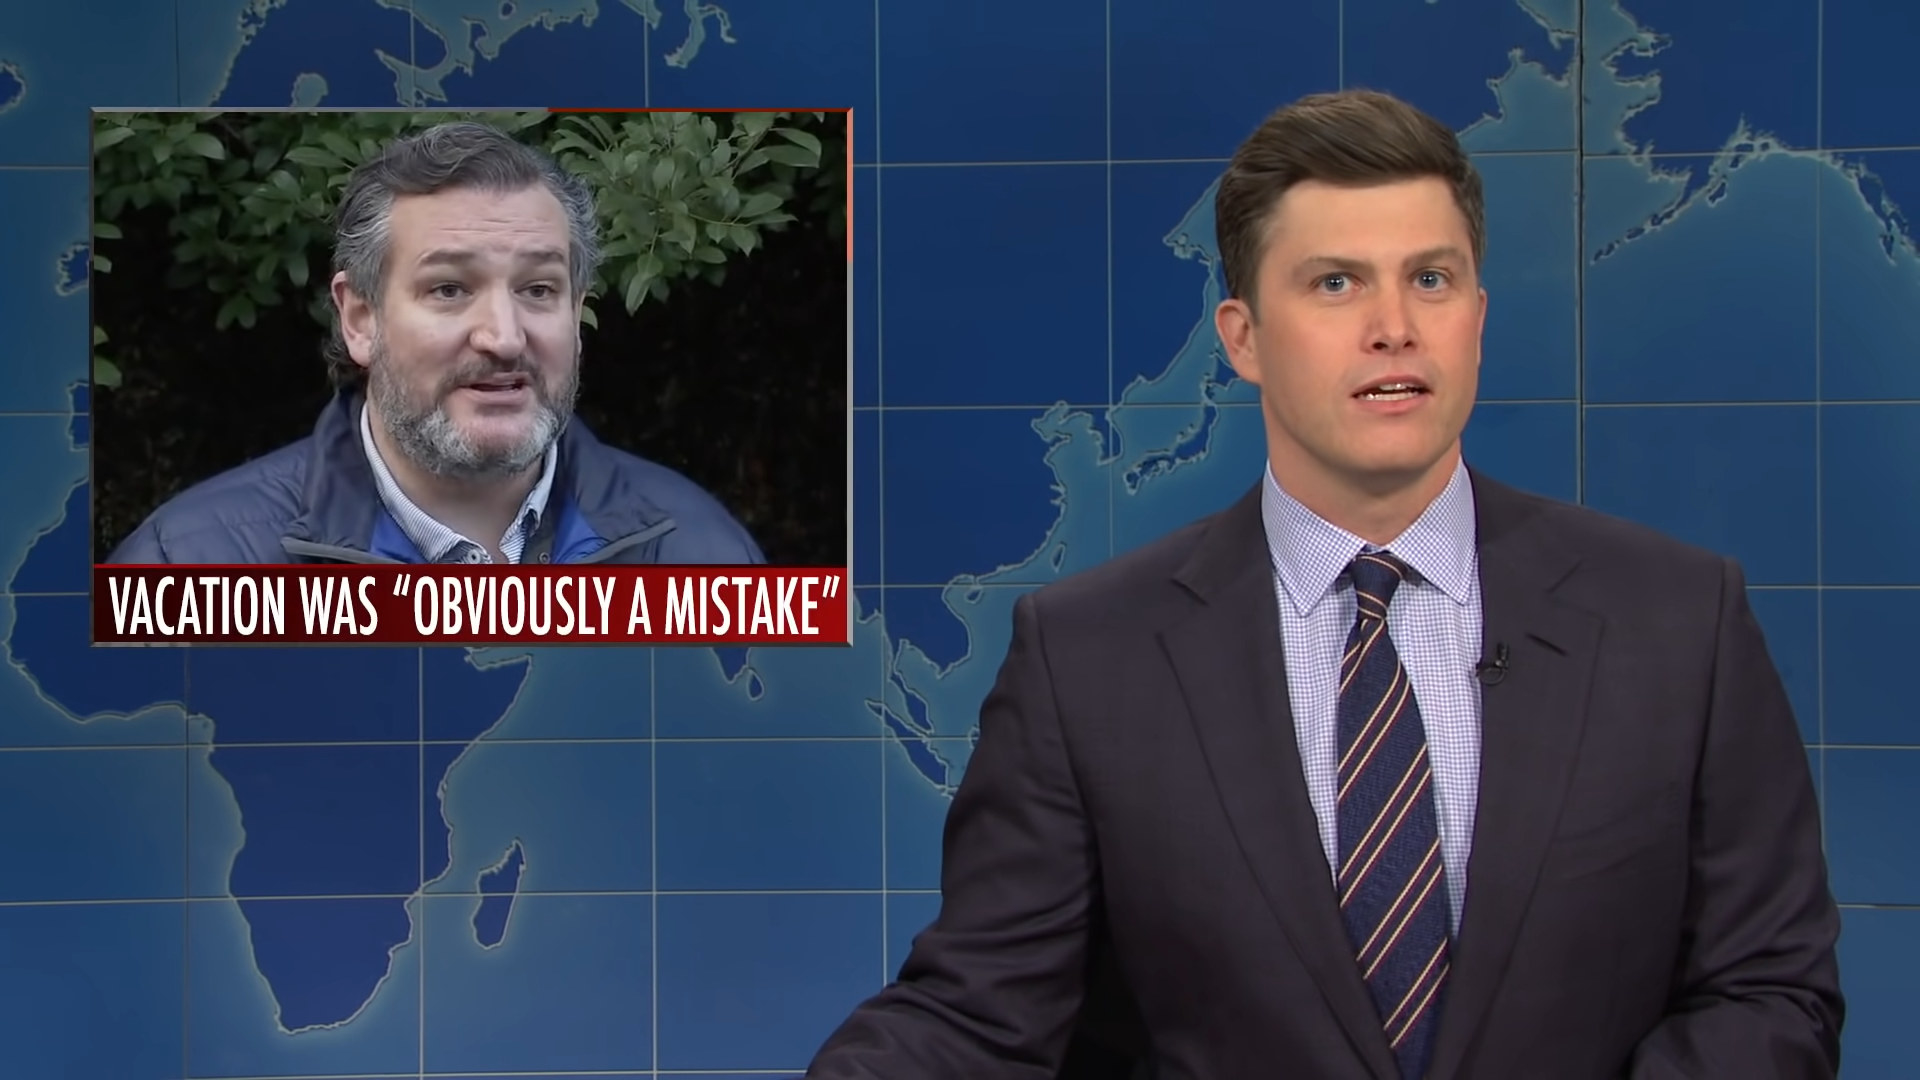 Colin Jost on &quot;Saturday Night Live&quot; with a photo of Ted Cruz with the caption &quot;Vacation was &#x27;obviously a mistake&#x27;&quot;